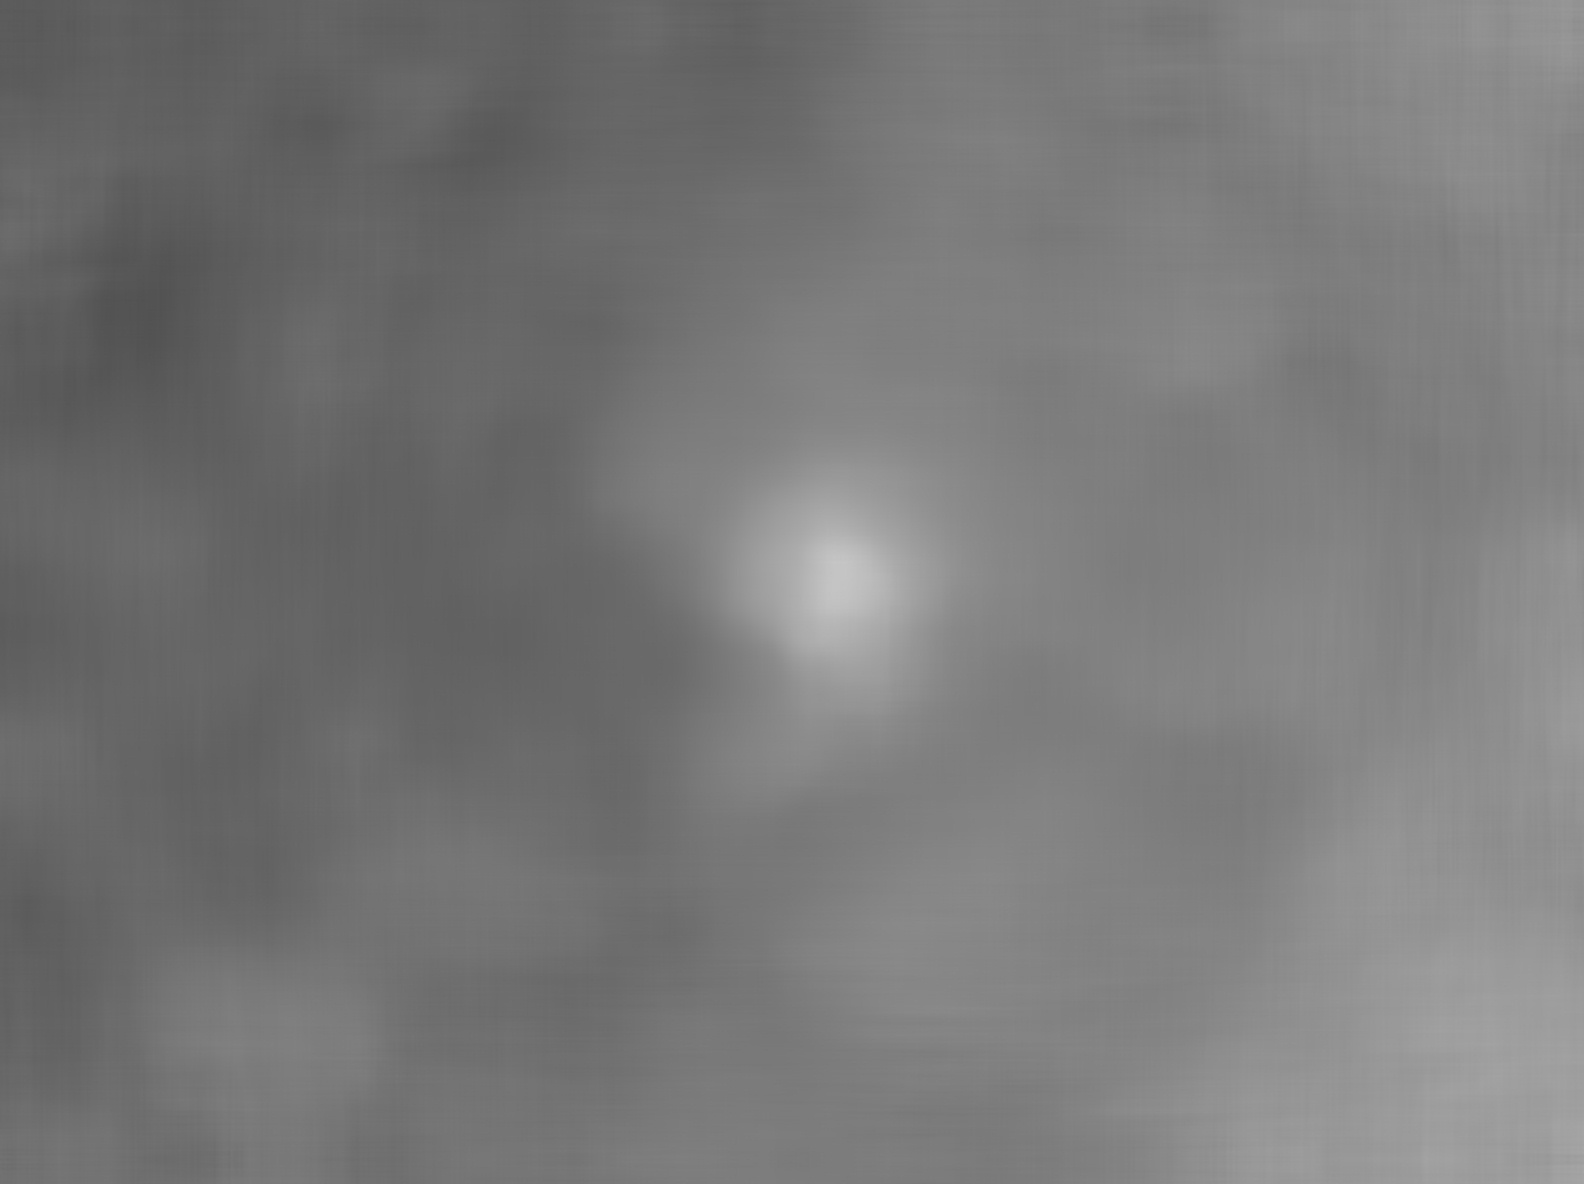 Nasa's Mars rover Curiosity acquired this image using its Mars Hand Lens Imager (MAHLI) on Sol 3222